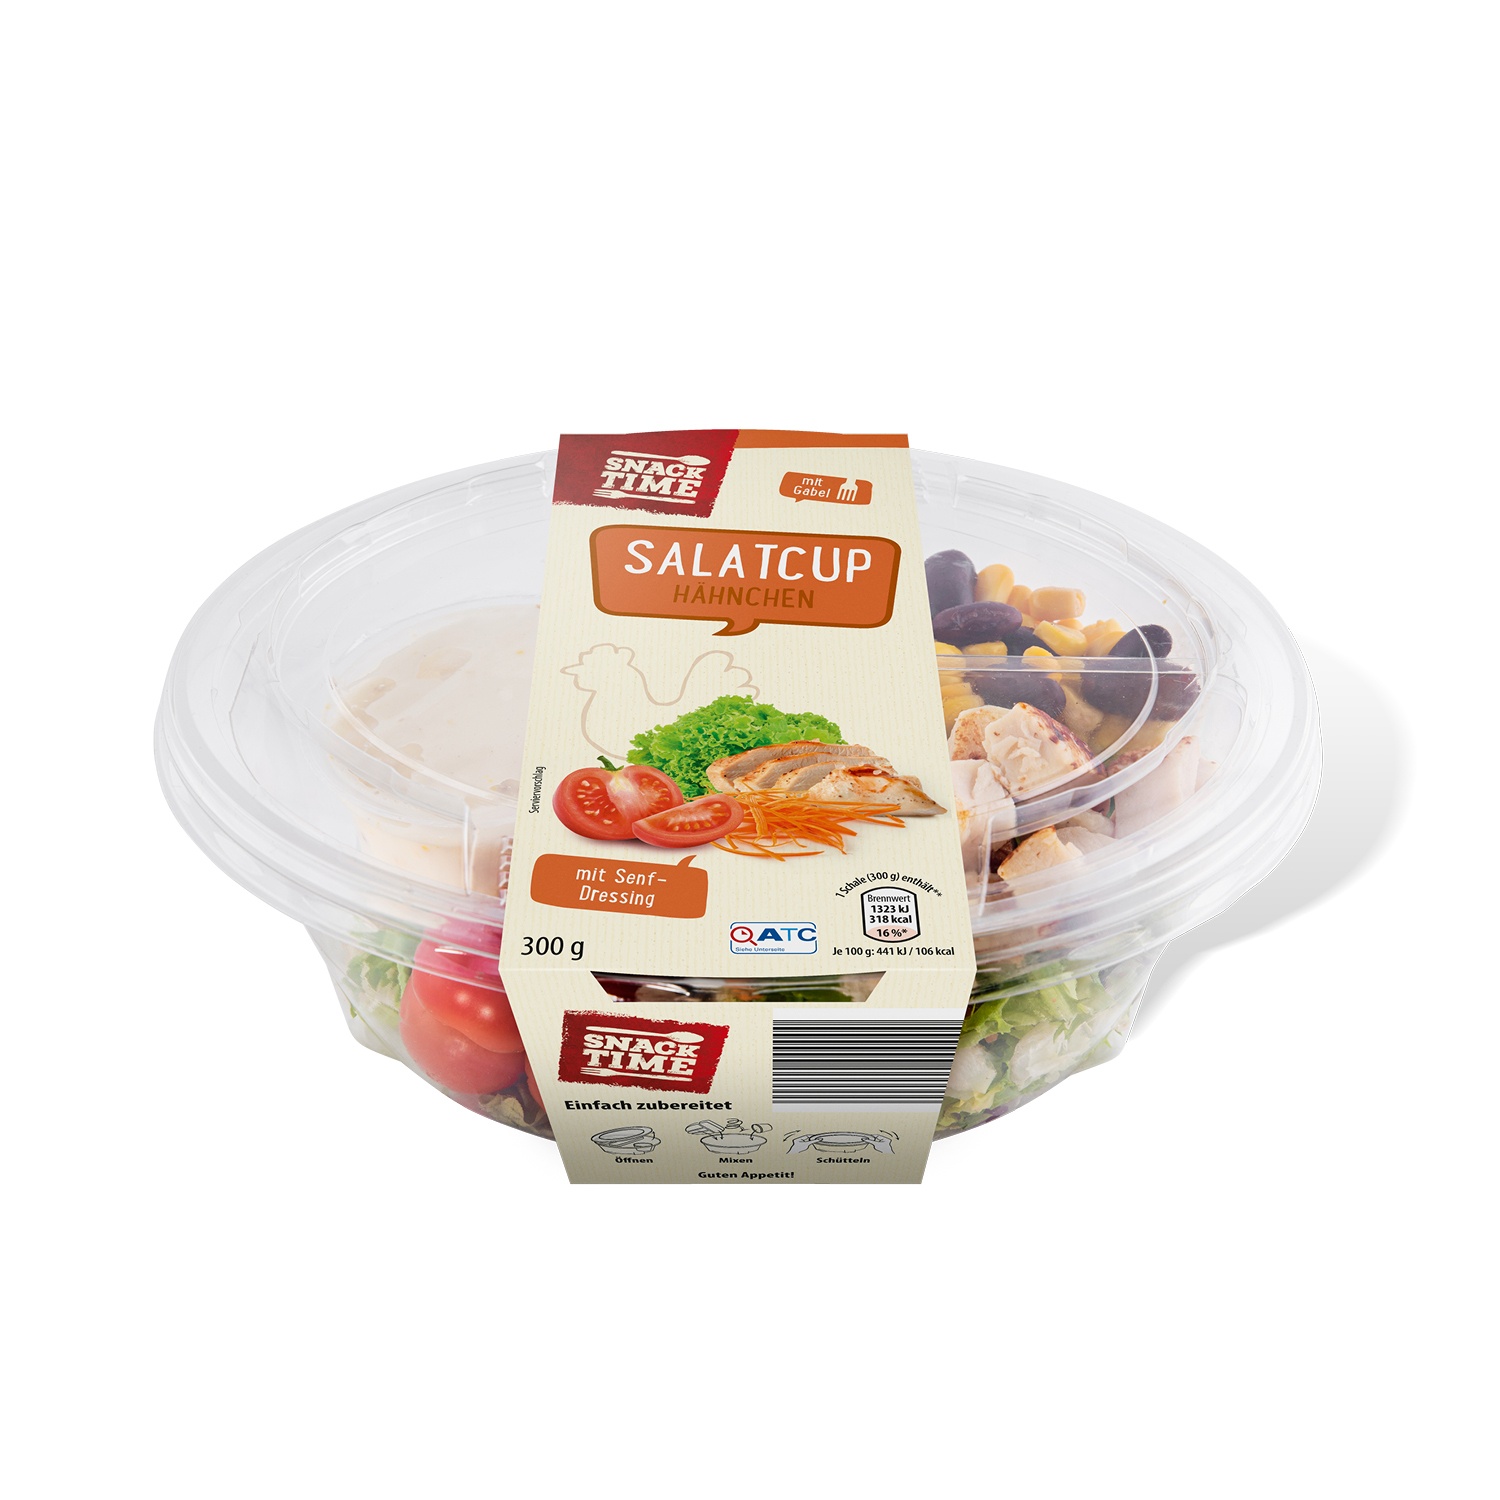 SNACK TIME Salatcup mit Dressing 300 g